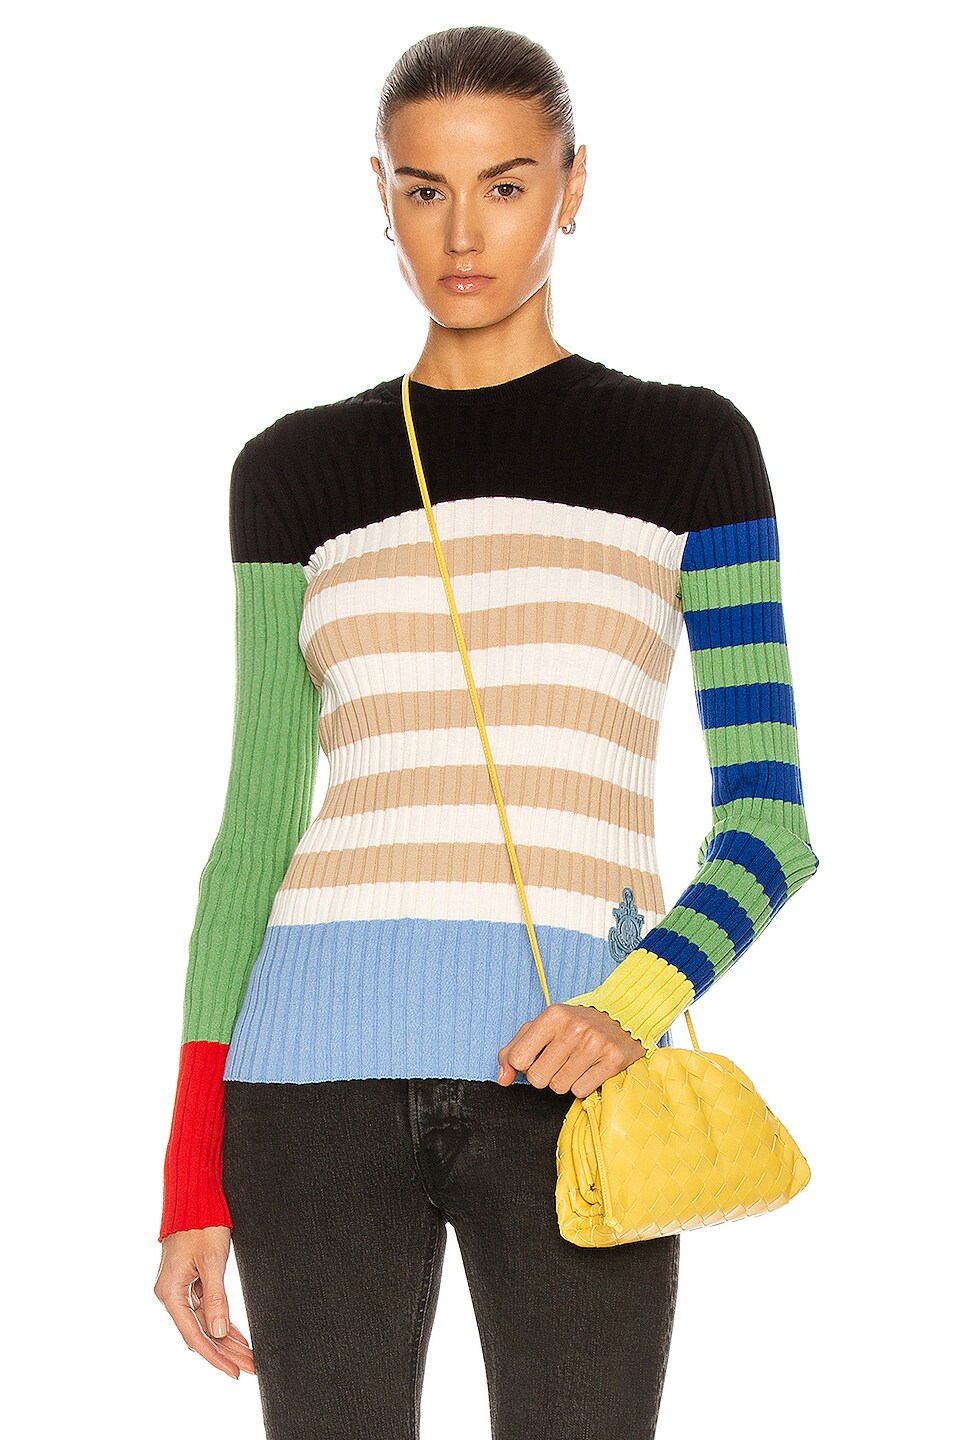 Image 1 of Moncler Genius 1 Moncler JW Anderson Girocollo Tricot Sweater in Colorblock Multi